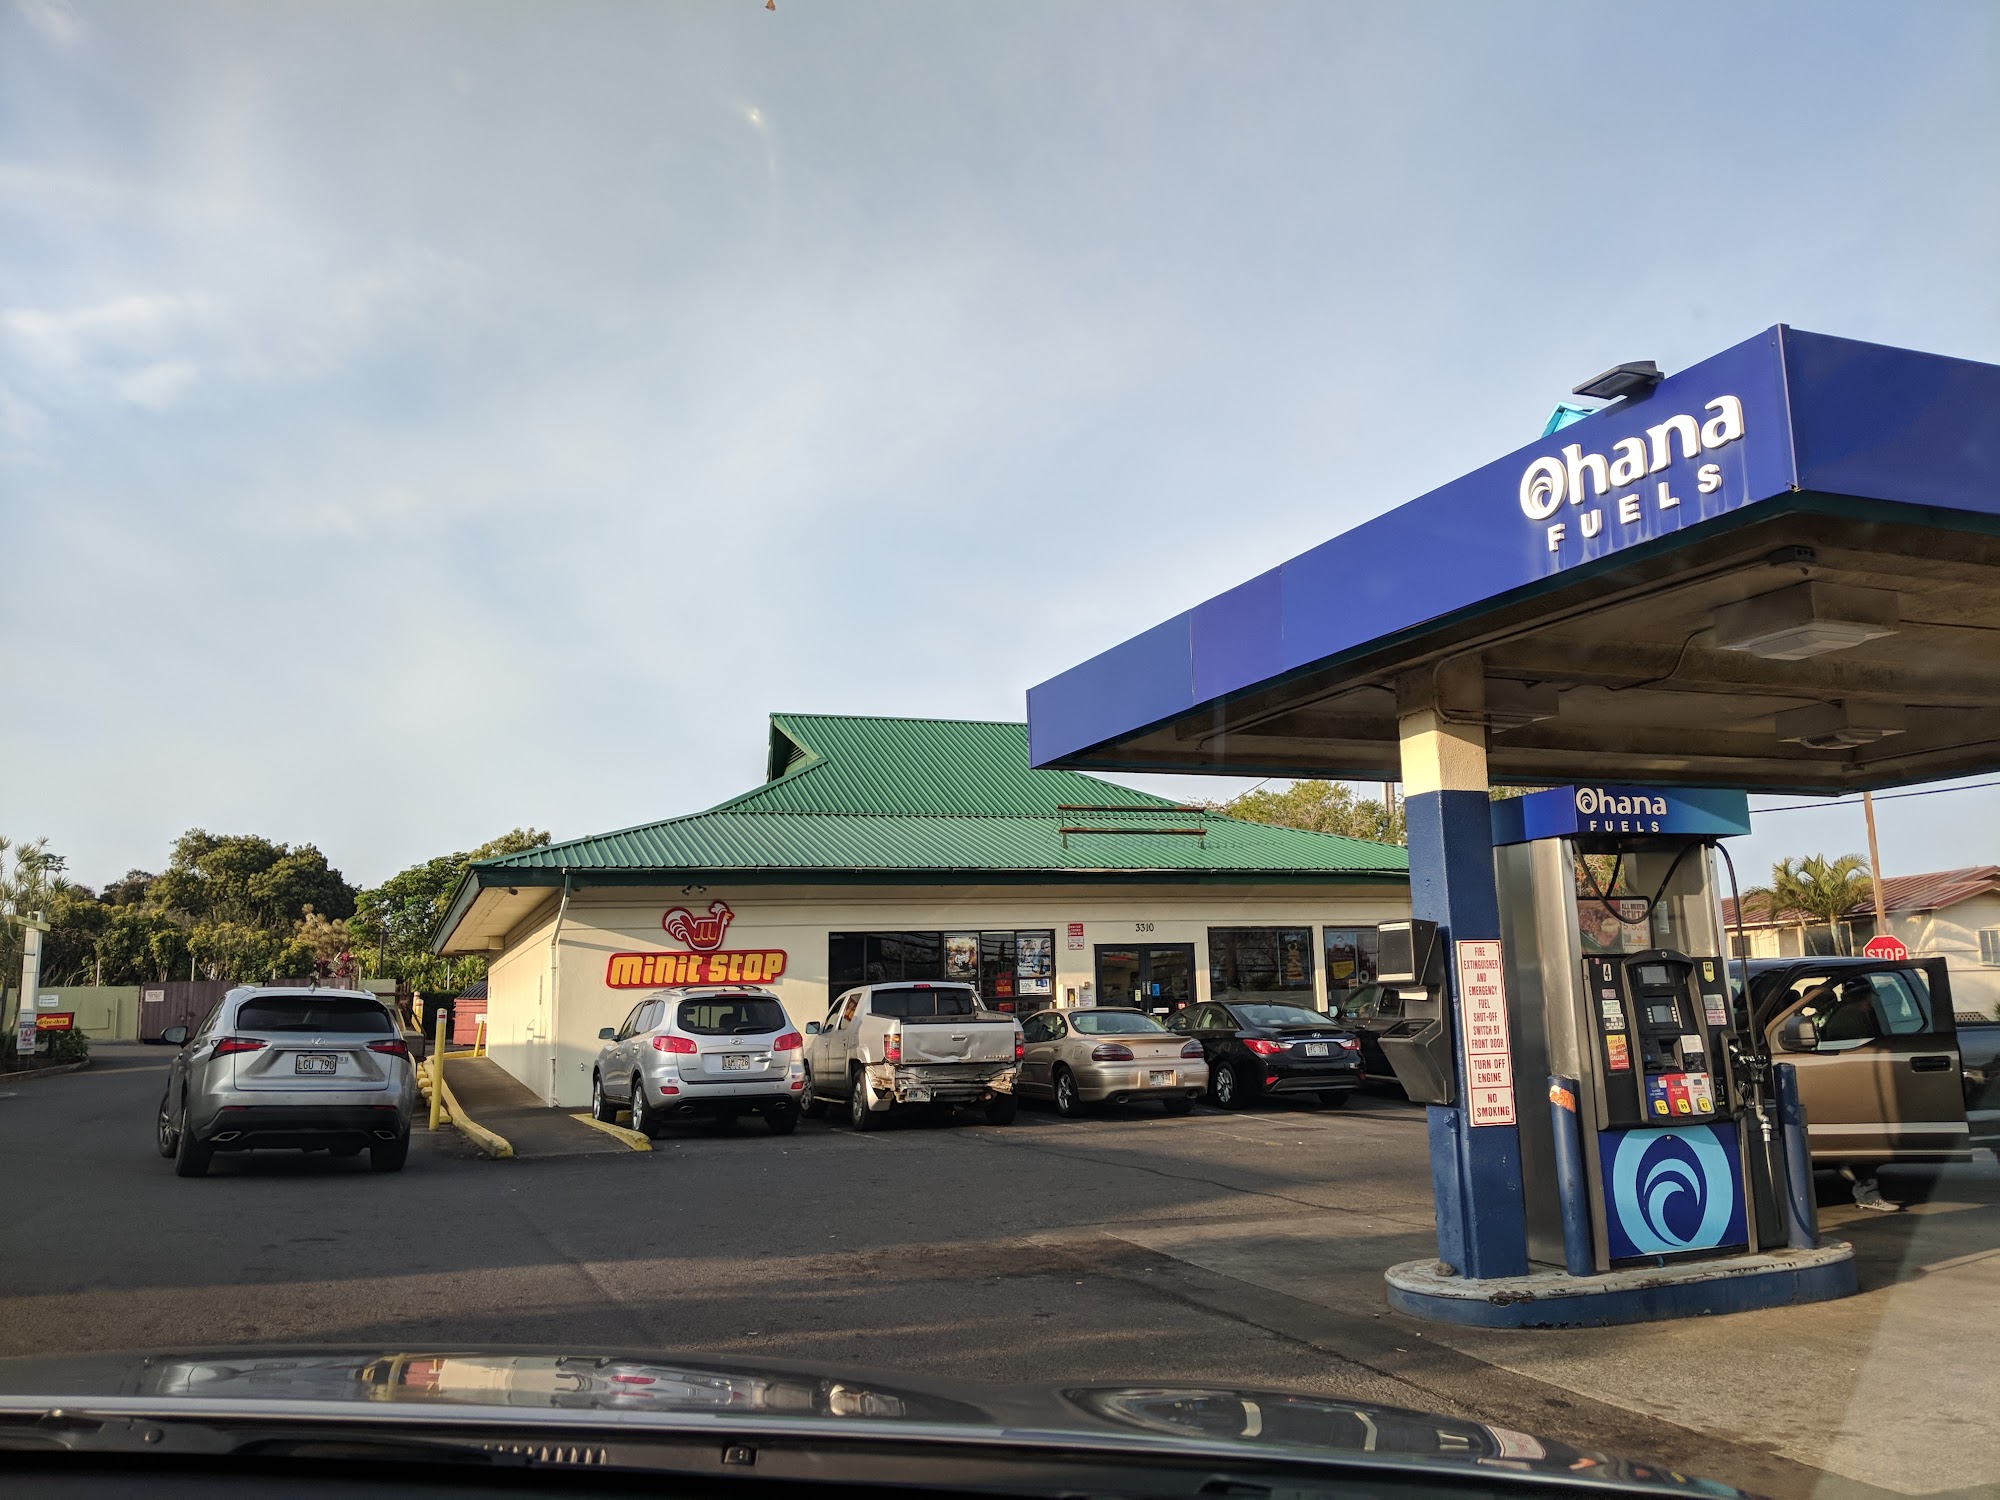 Minit Stop Pukalani - Fried Chicken, Convenience Store and Gas Station